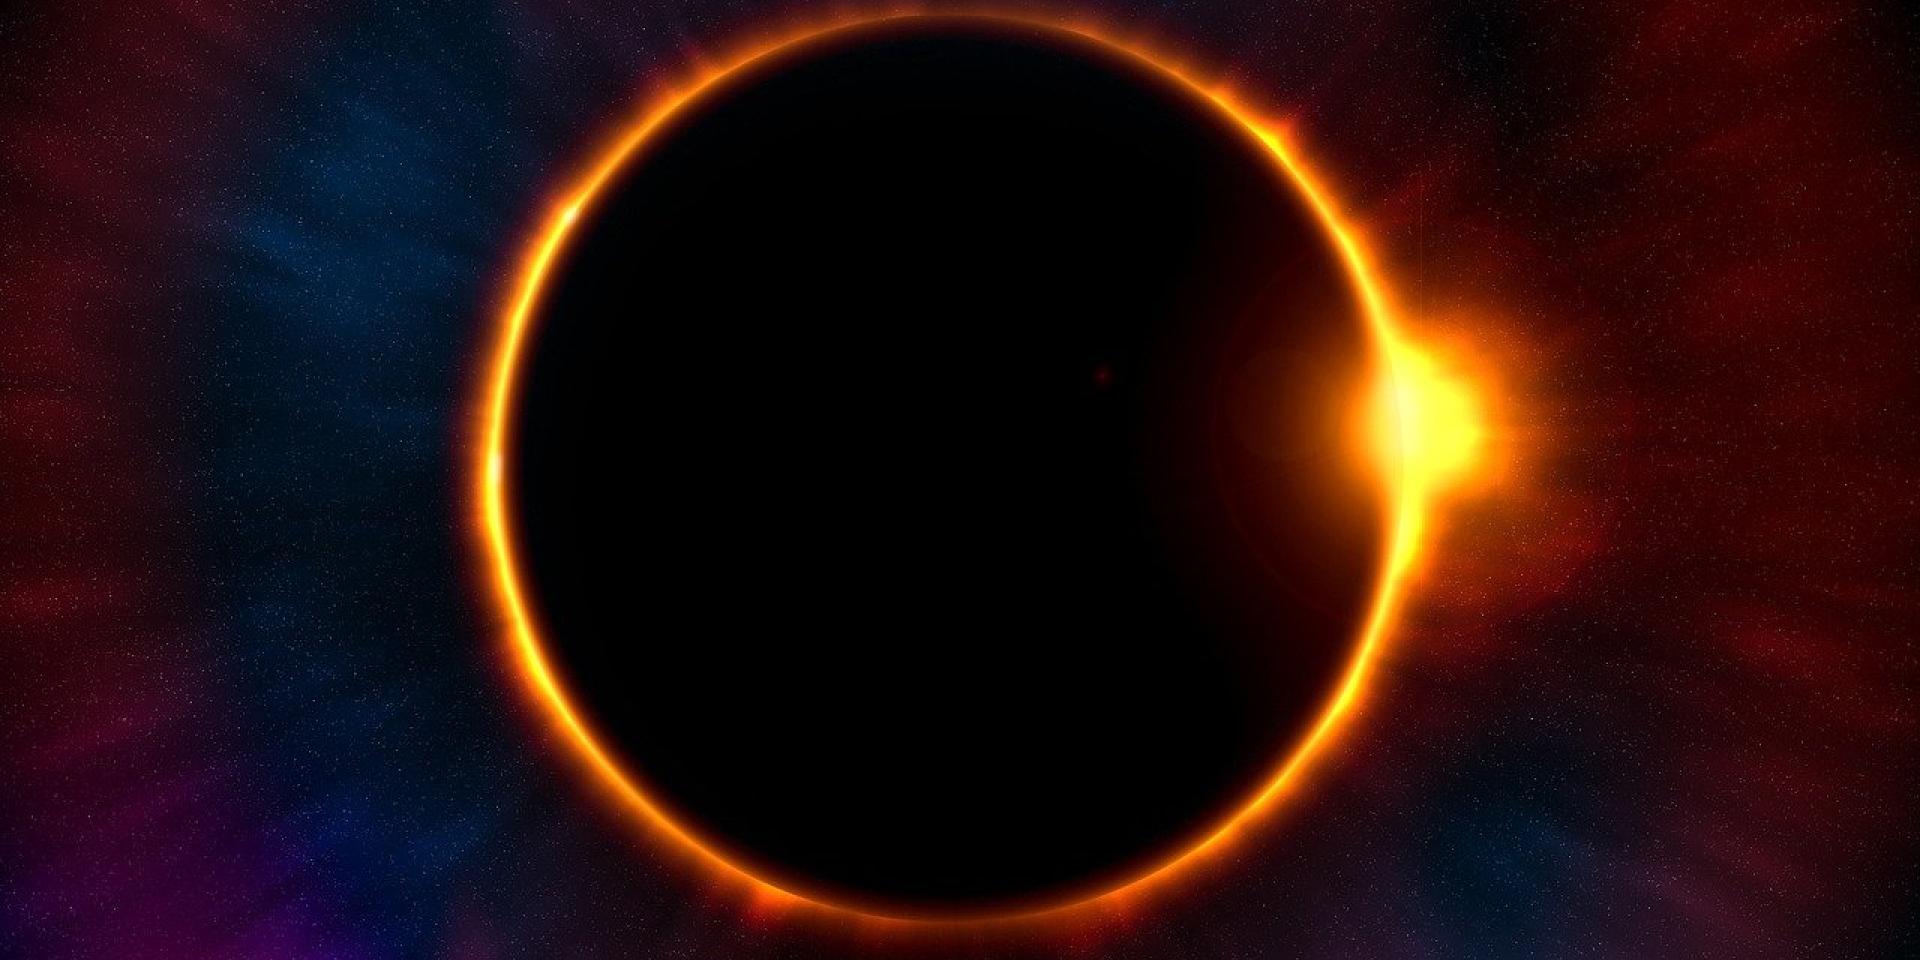 An image of a solar eclipse. The moon is covering the sun in a starry sky with only the edges of the sun visible. 